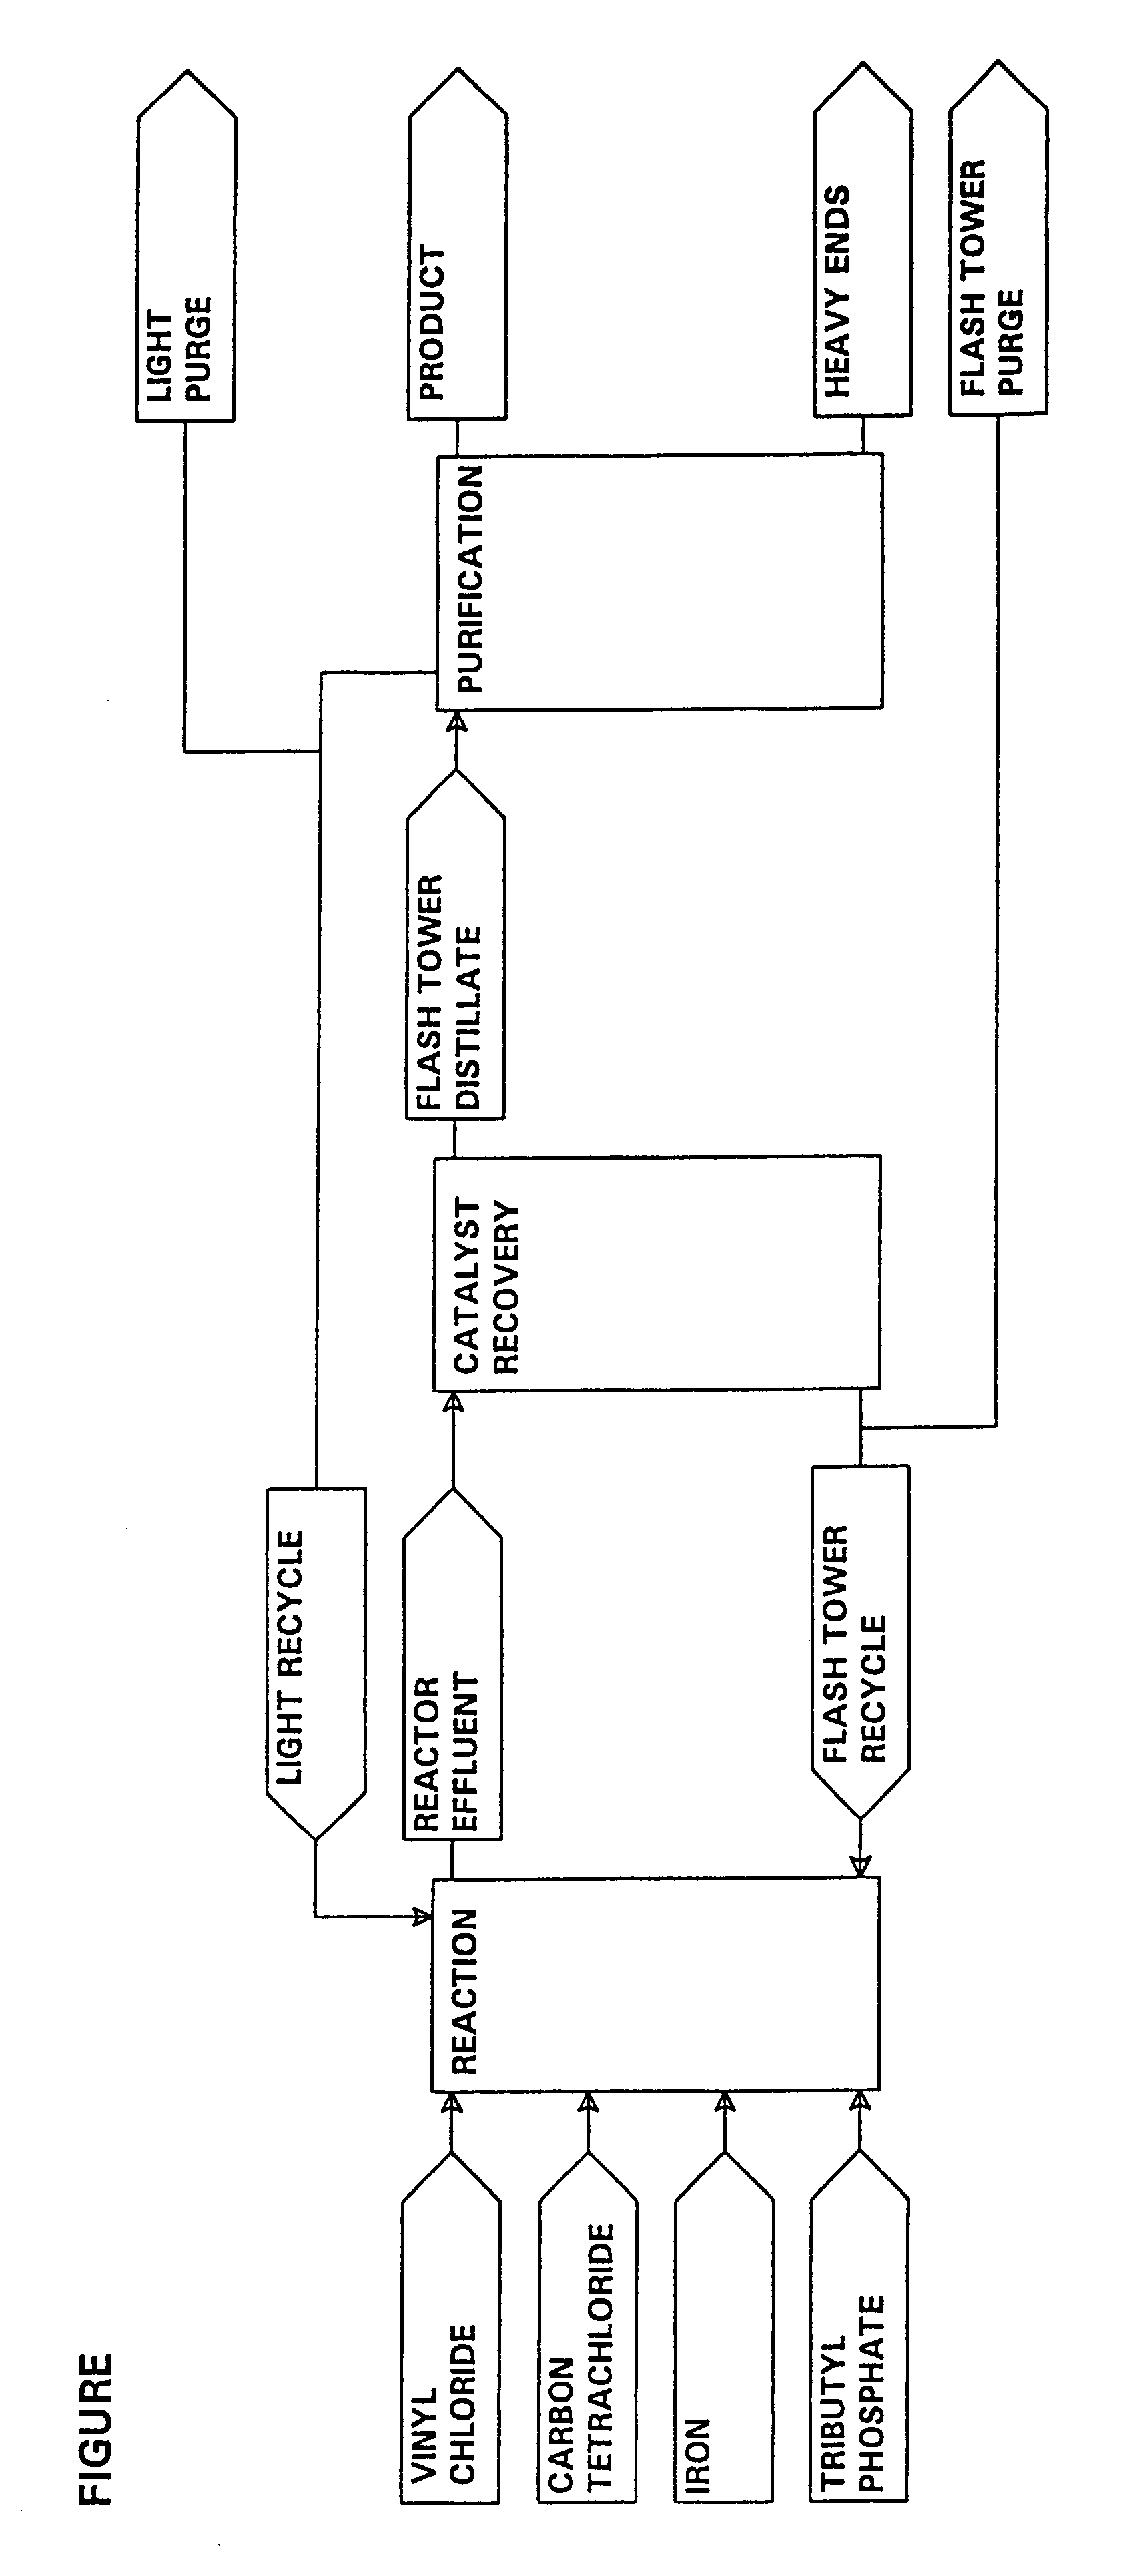 Process for the manufacture of 1, 1, 1, 3, 3-pentachloropropane